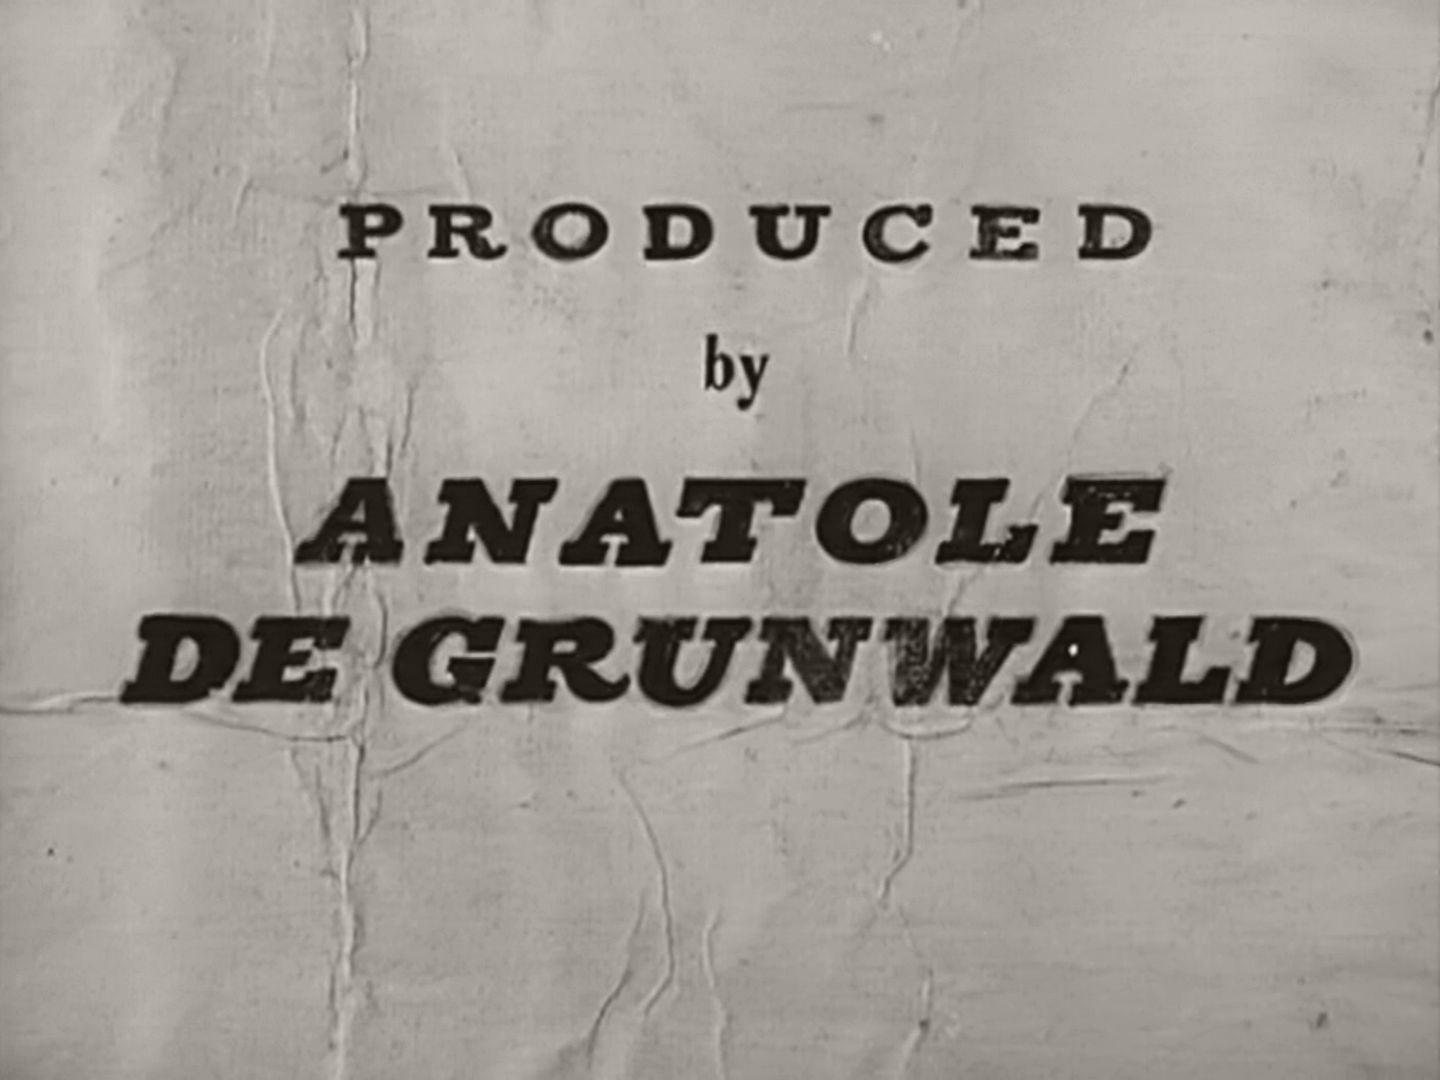 Main title from The Queen of Spades (1949) (15). Produced by Anatole de Grunwald